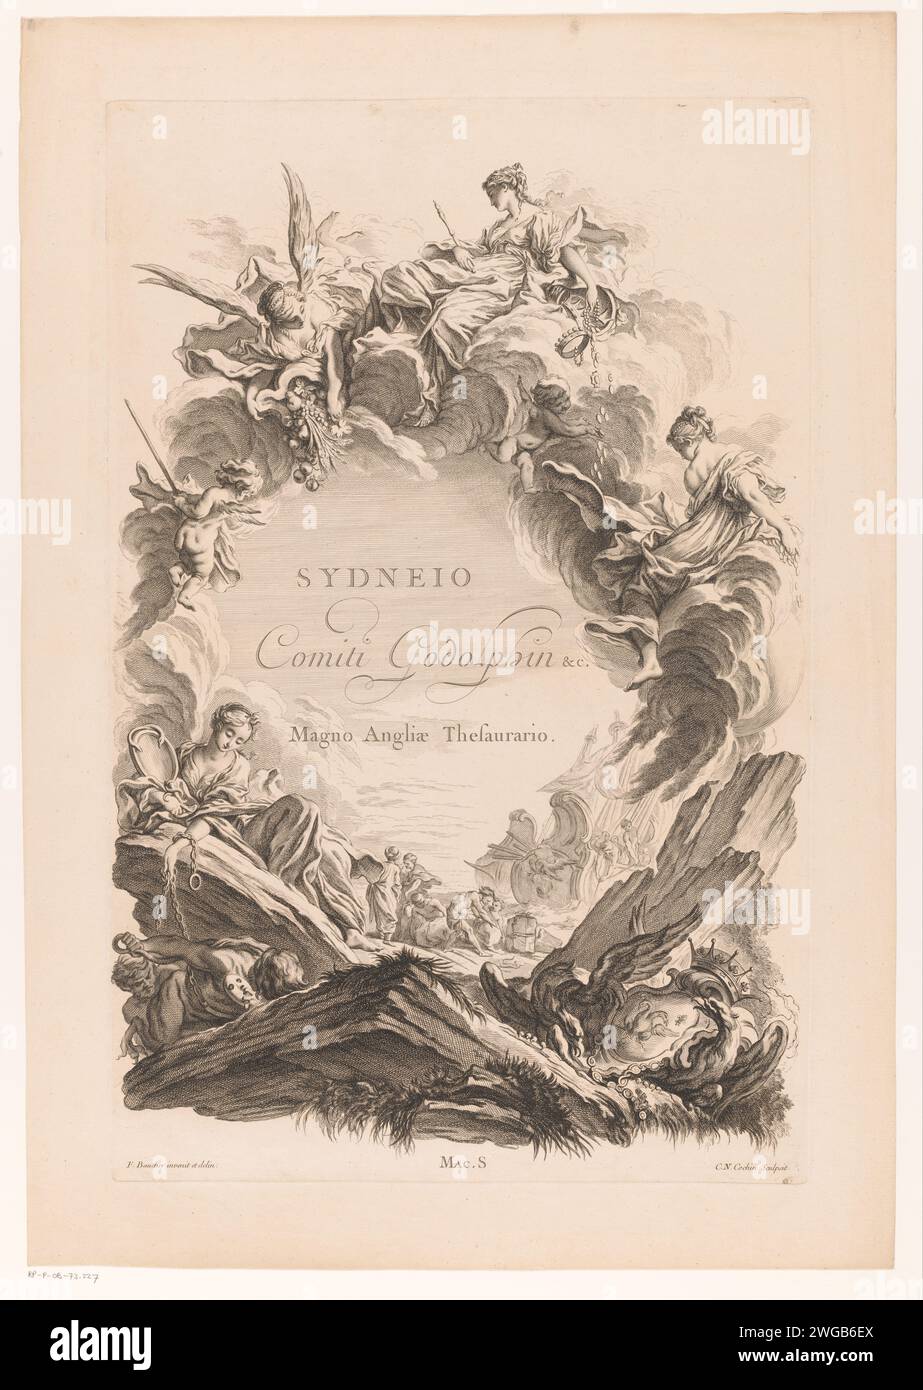 Allegory on Sidney Godolphin, 1st count of Godolphin, Charles Nicolas Cochin (I), Charles Nicolas Cochin (II), After François Boucher, 1735 - 1741 print  Paris paper etching / engraving Prudentia (Prudence) as Roman personification Stock Photo